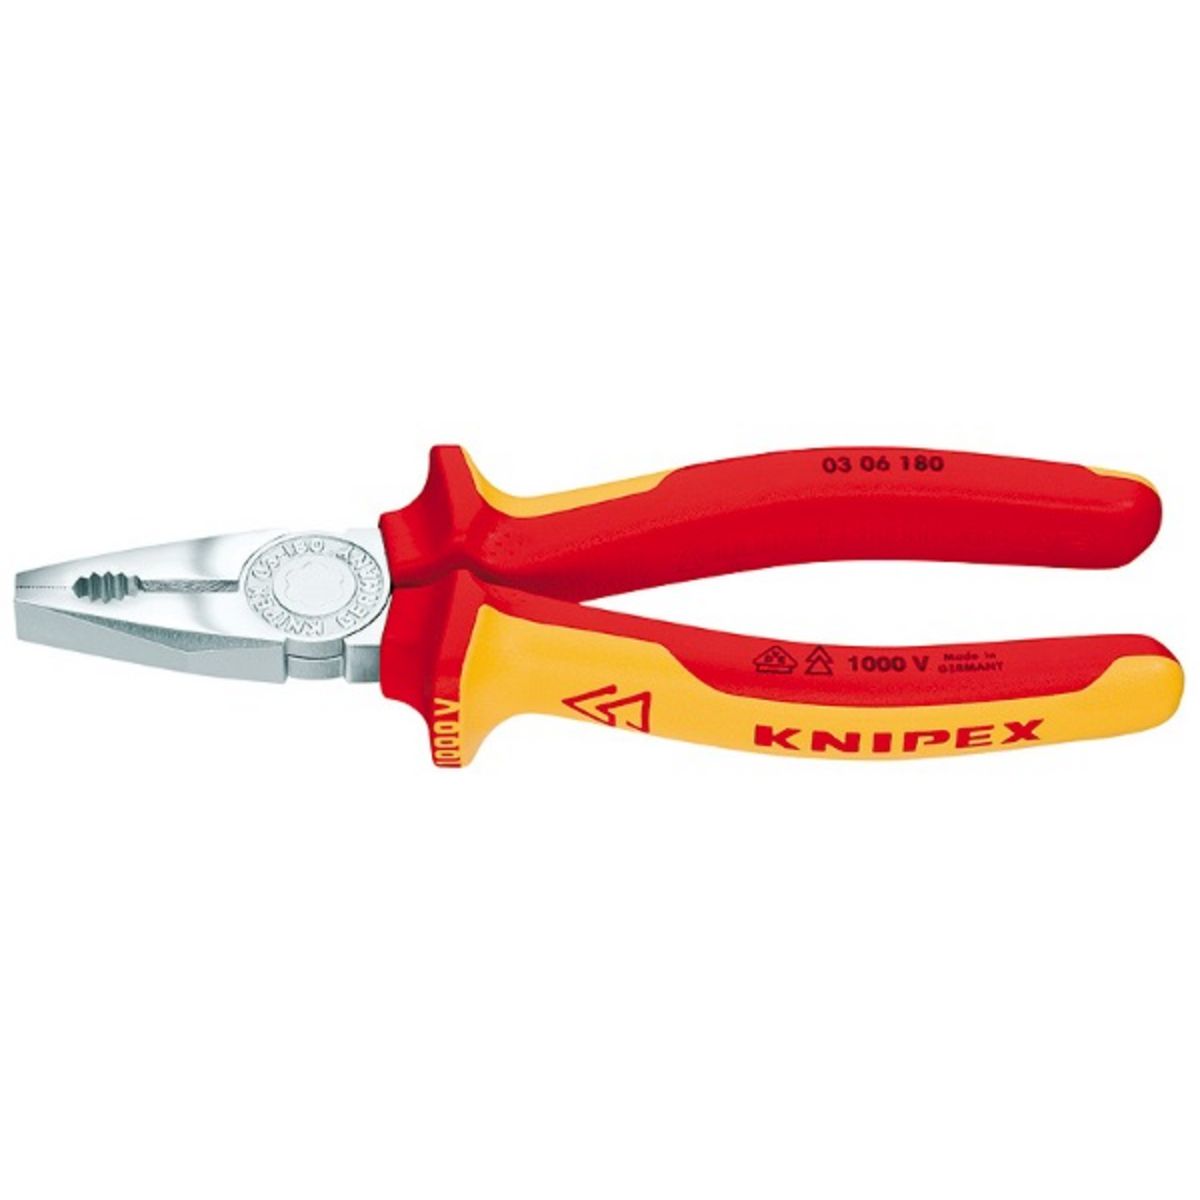 Knipex Pince universelle isolée 1000 V